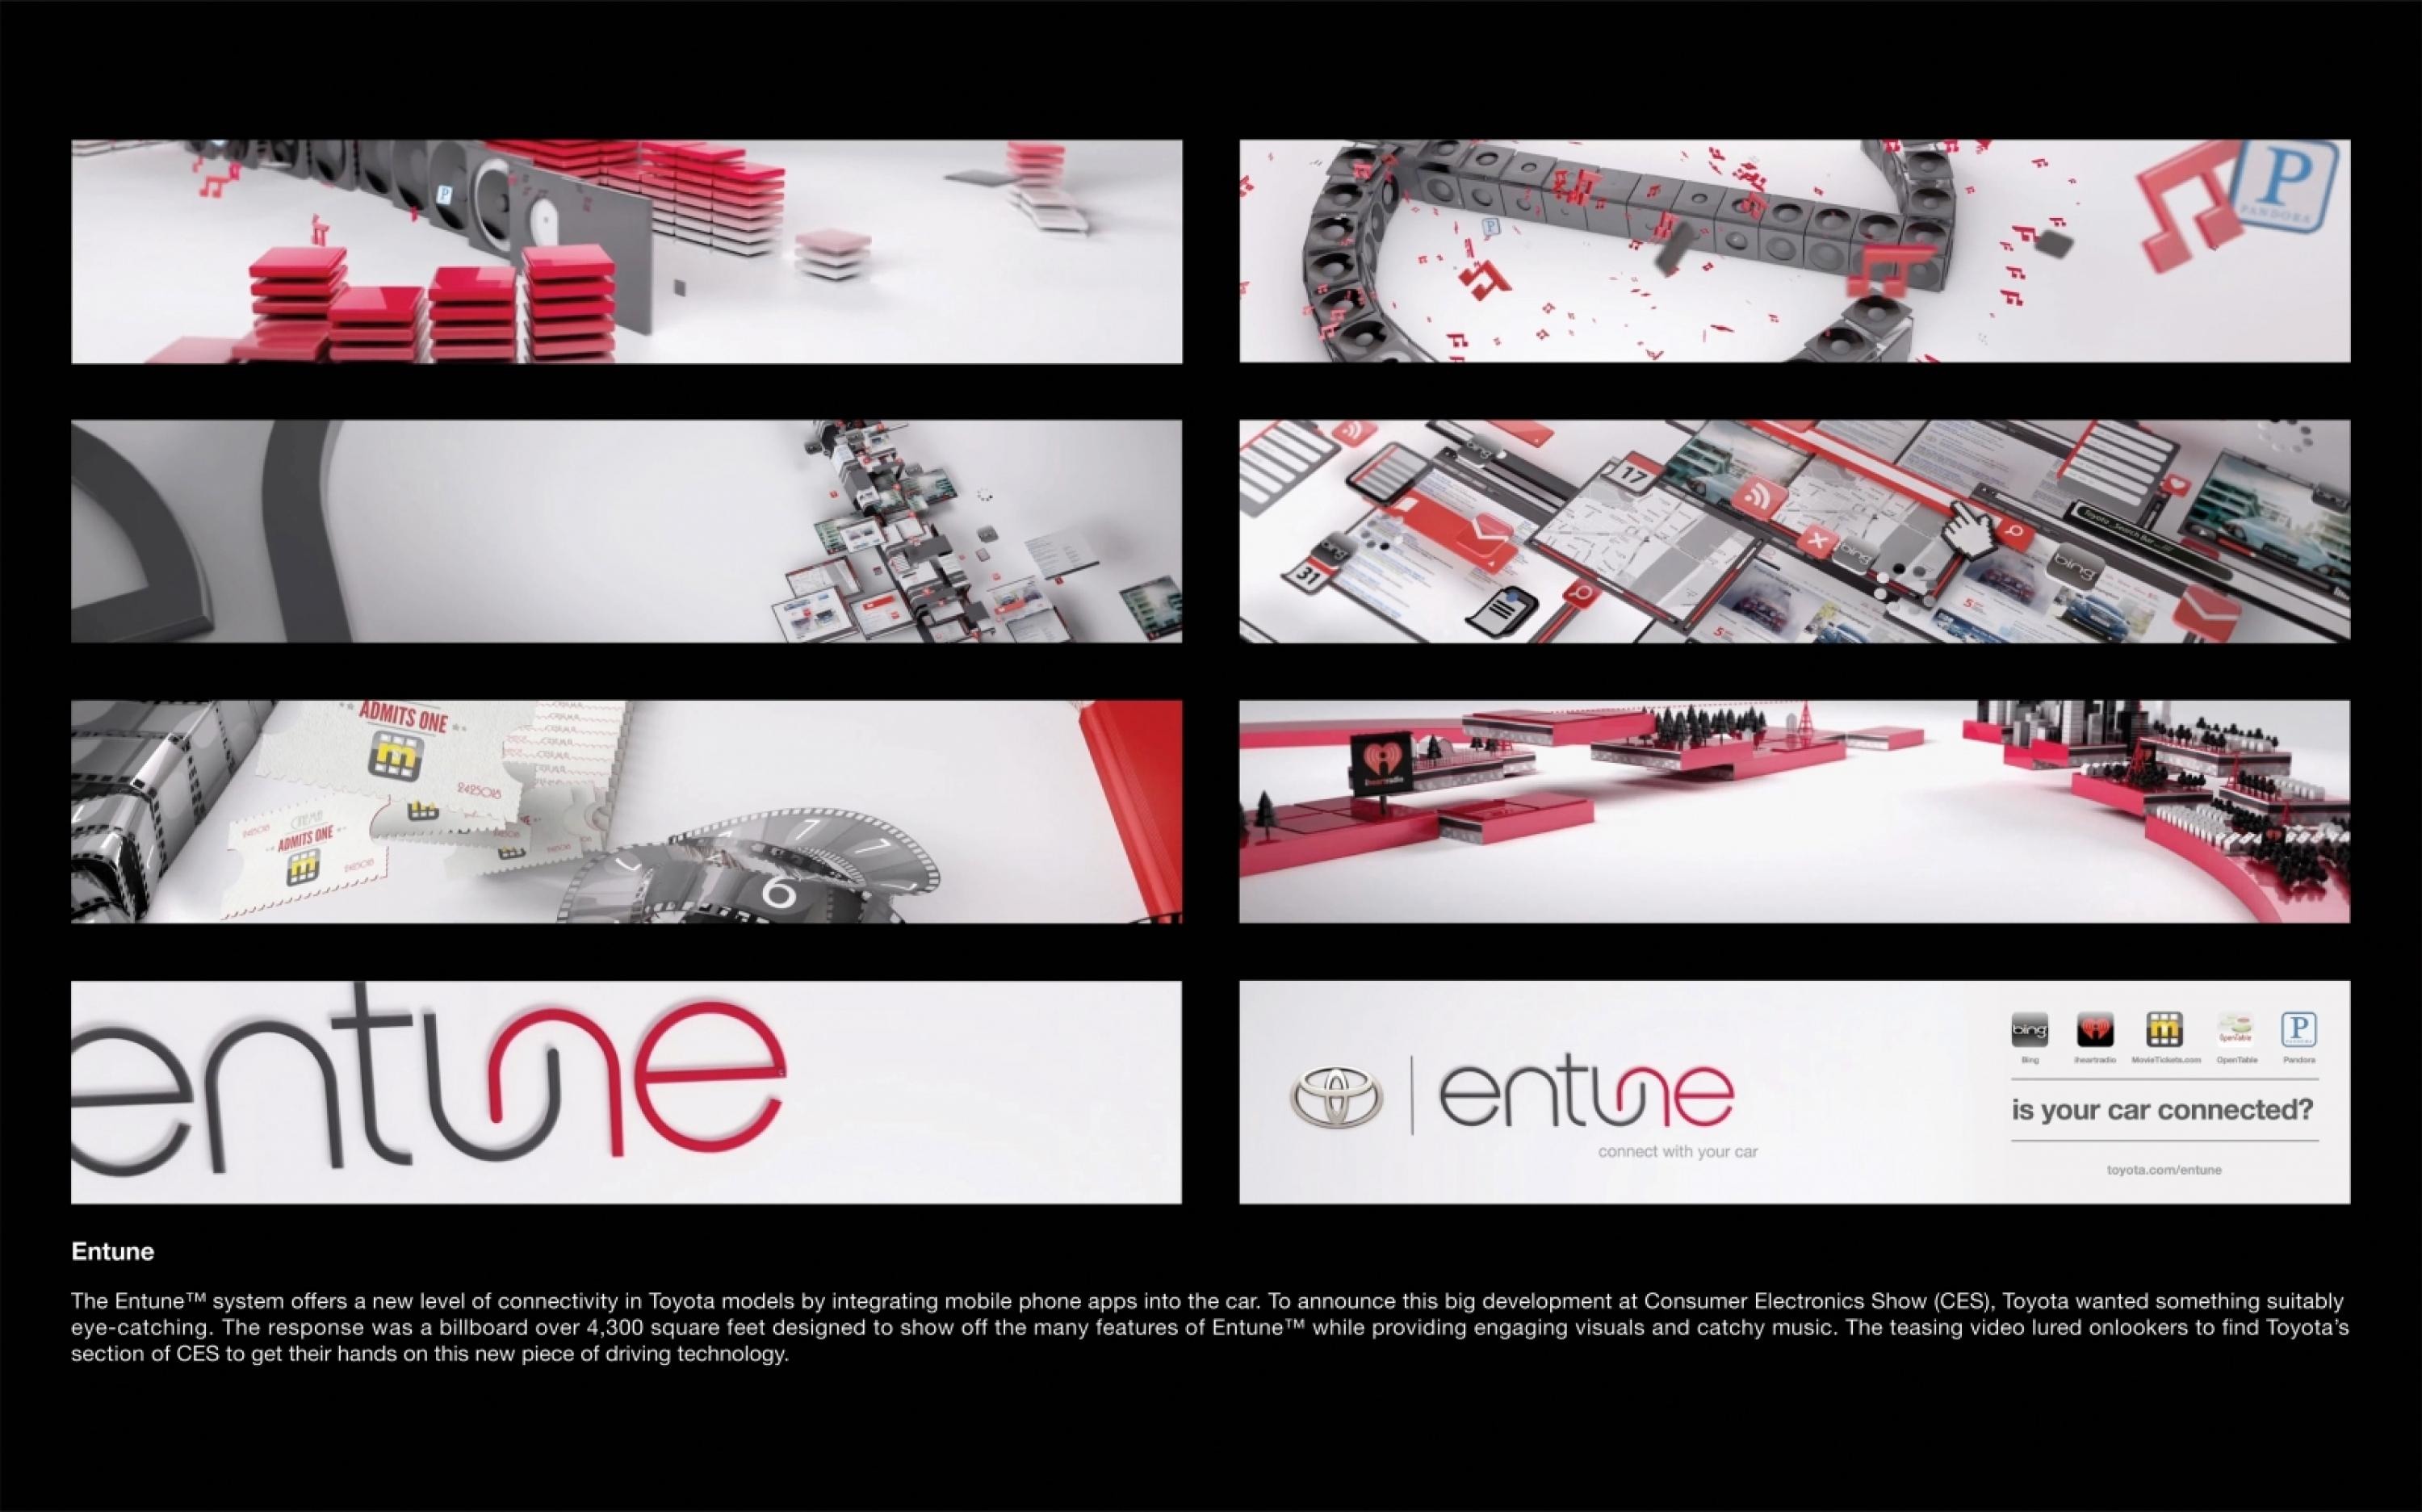 ENTUNE IN-CAR SYSTEM